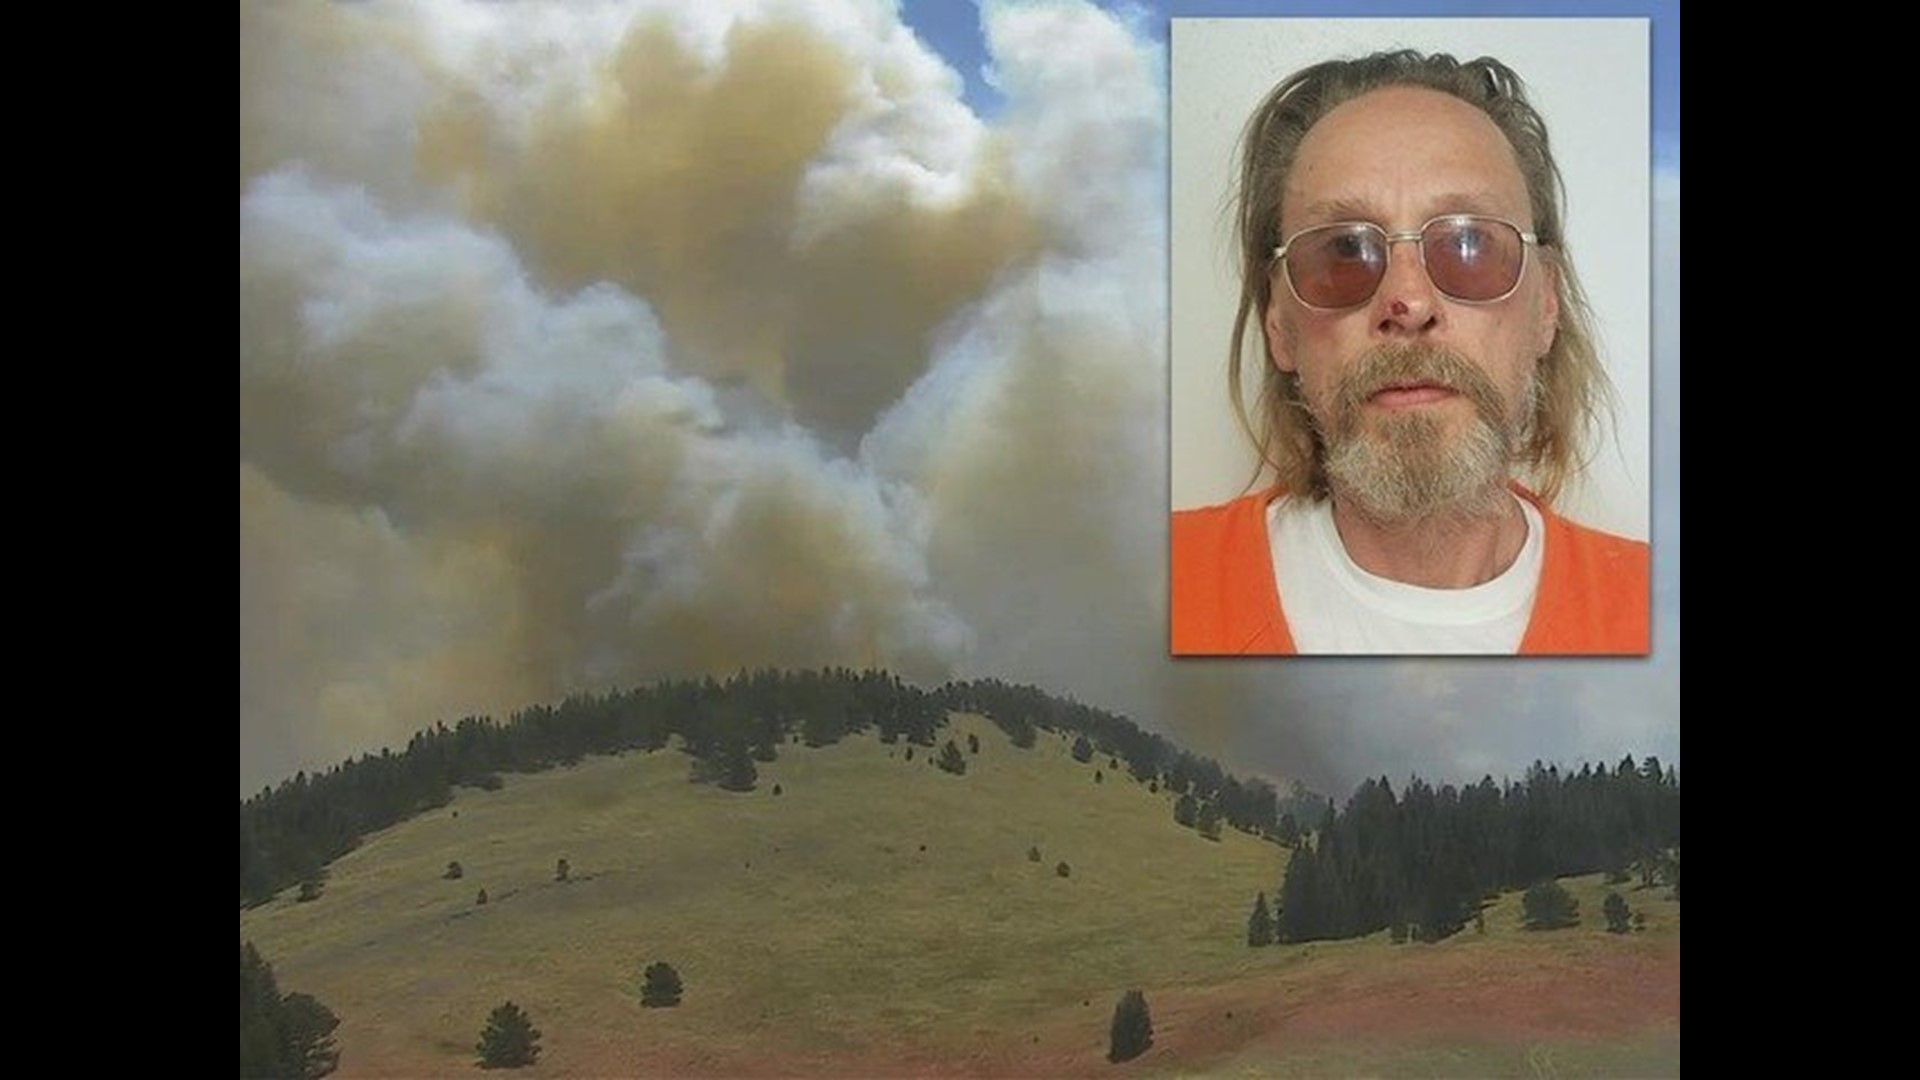 As Spring Fire grows, 52-year-old arson suspect arrested | fox61.com